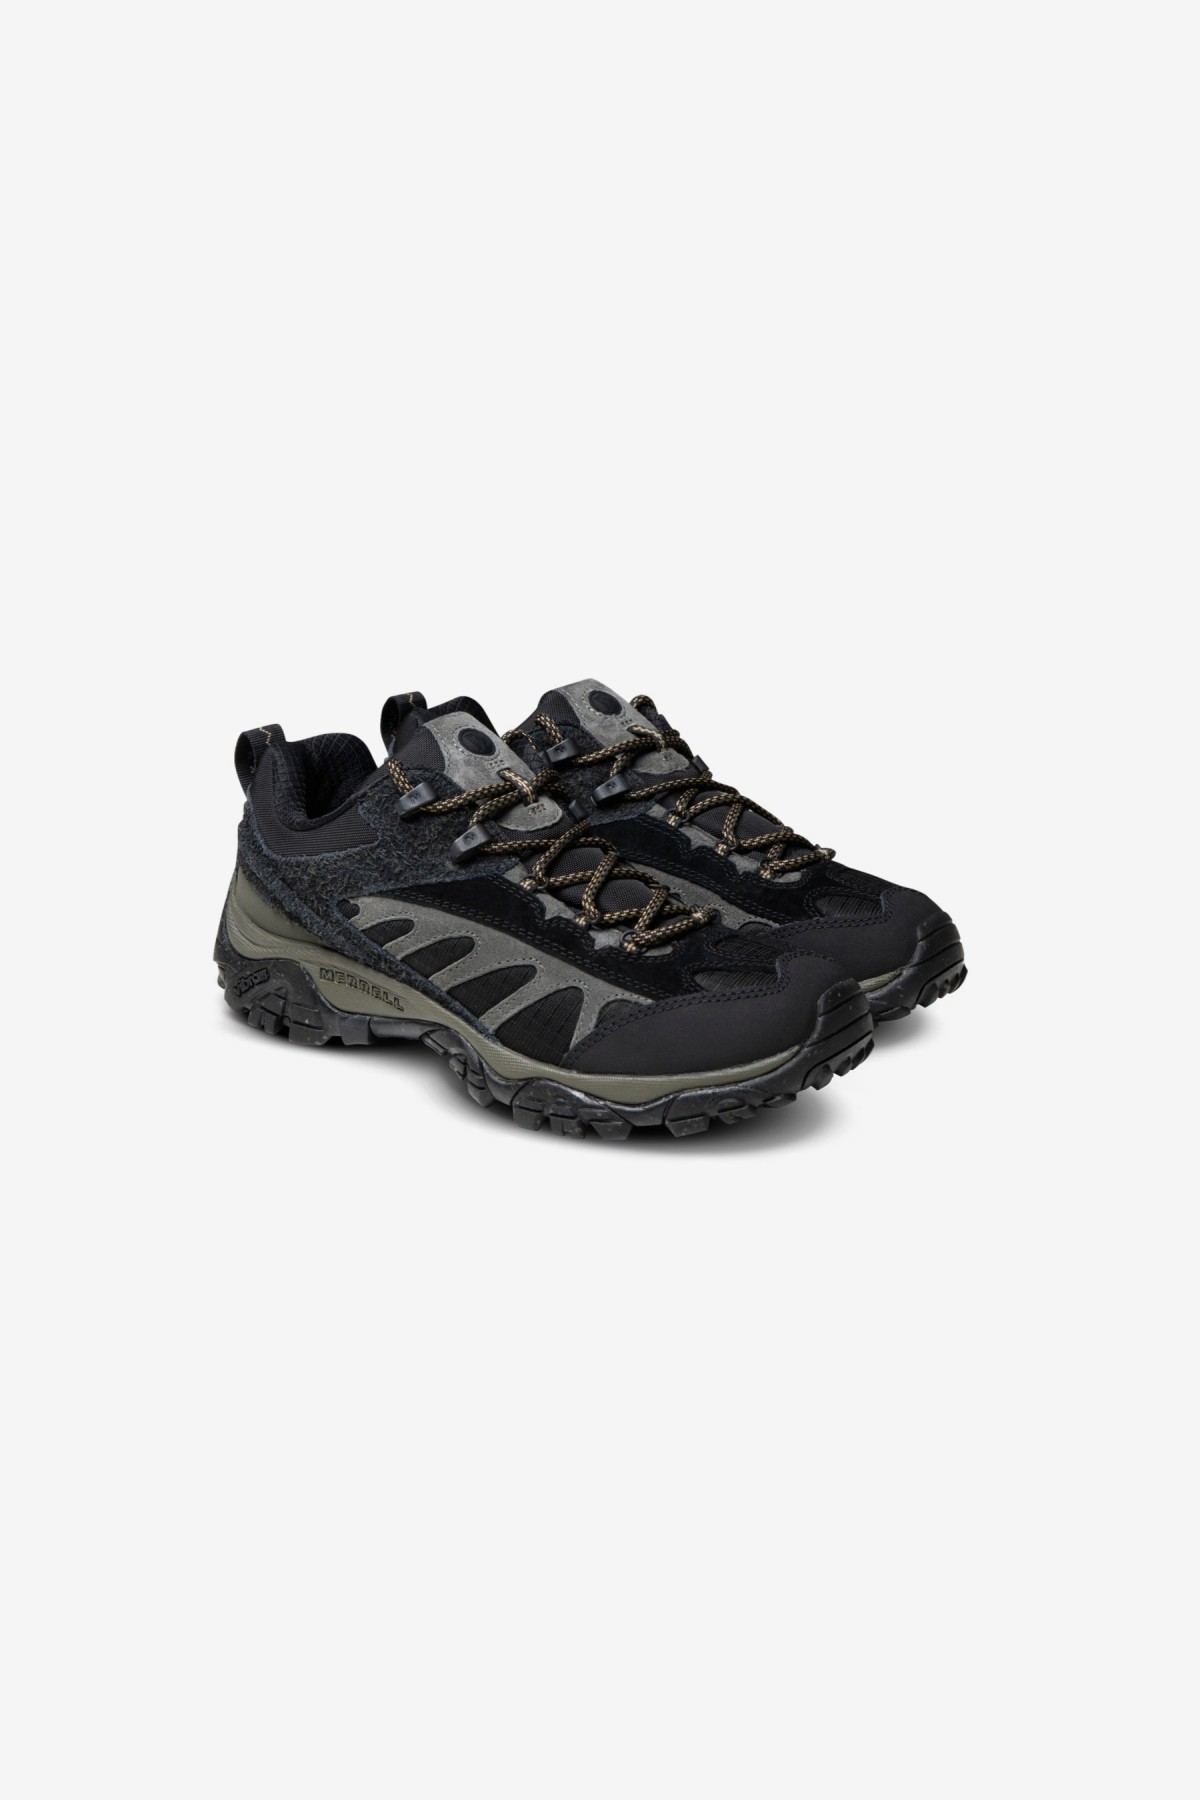 Merrell Moab Mesa Luxe in Olive/Otter